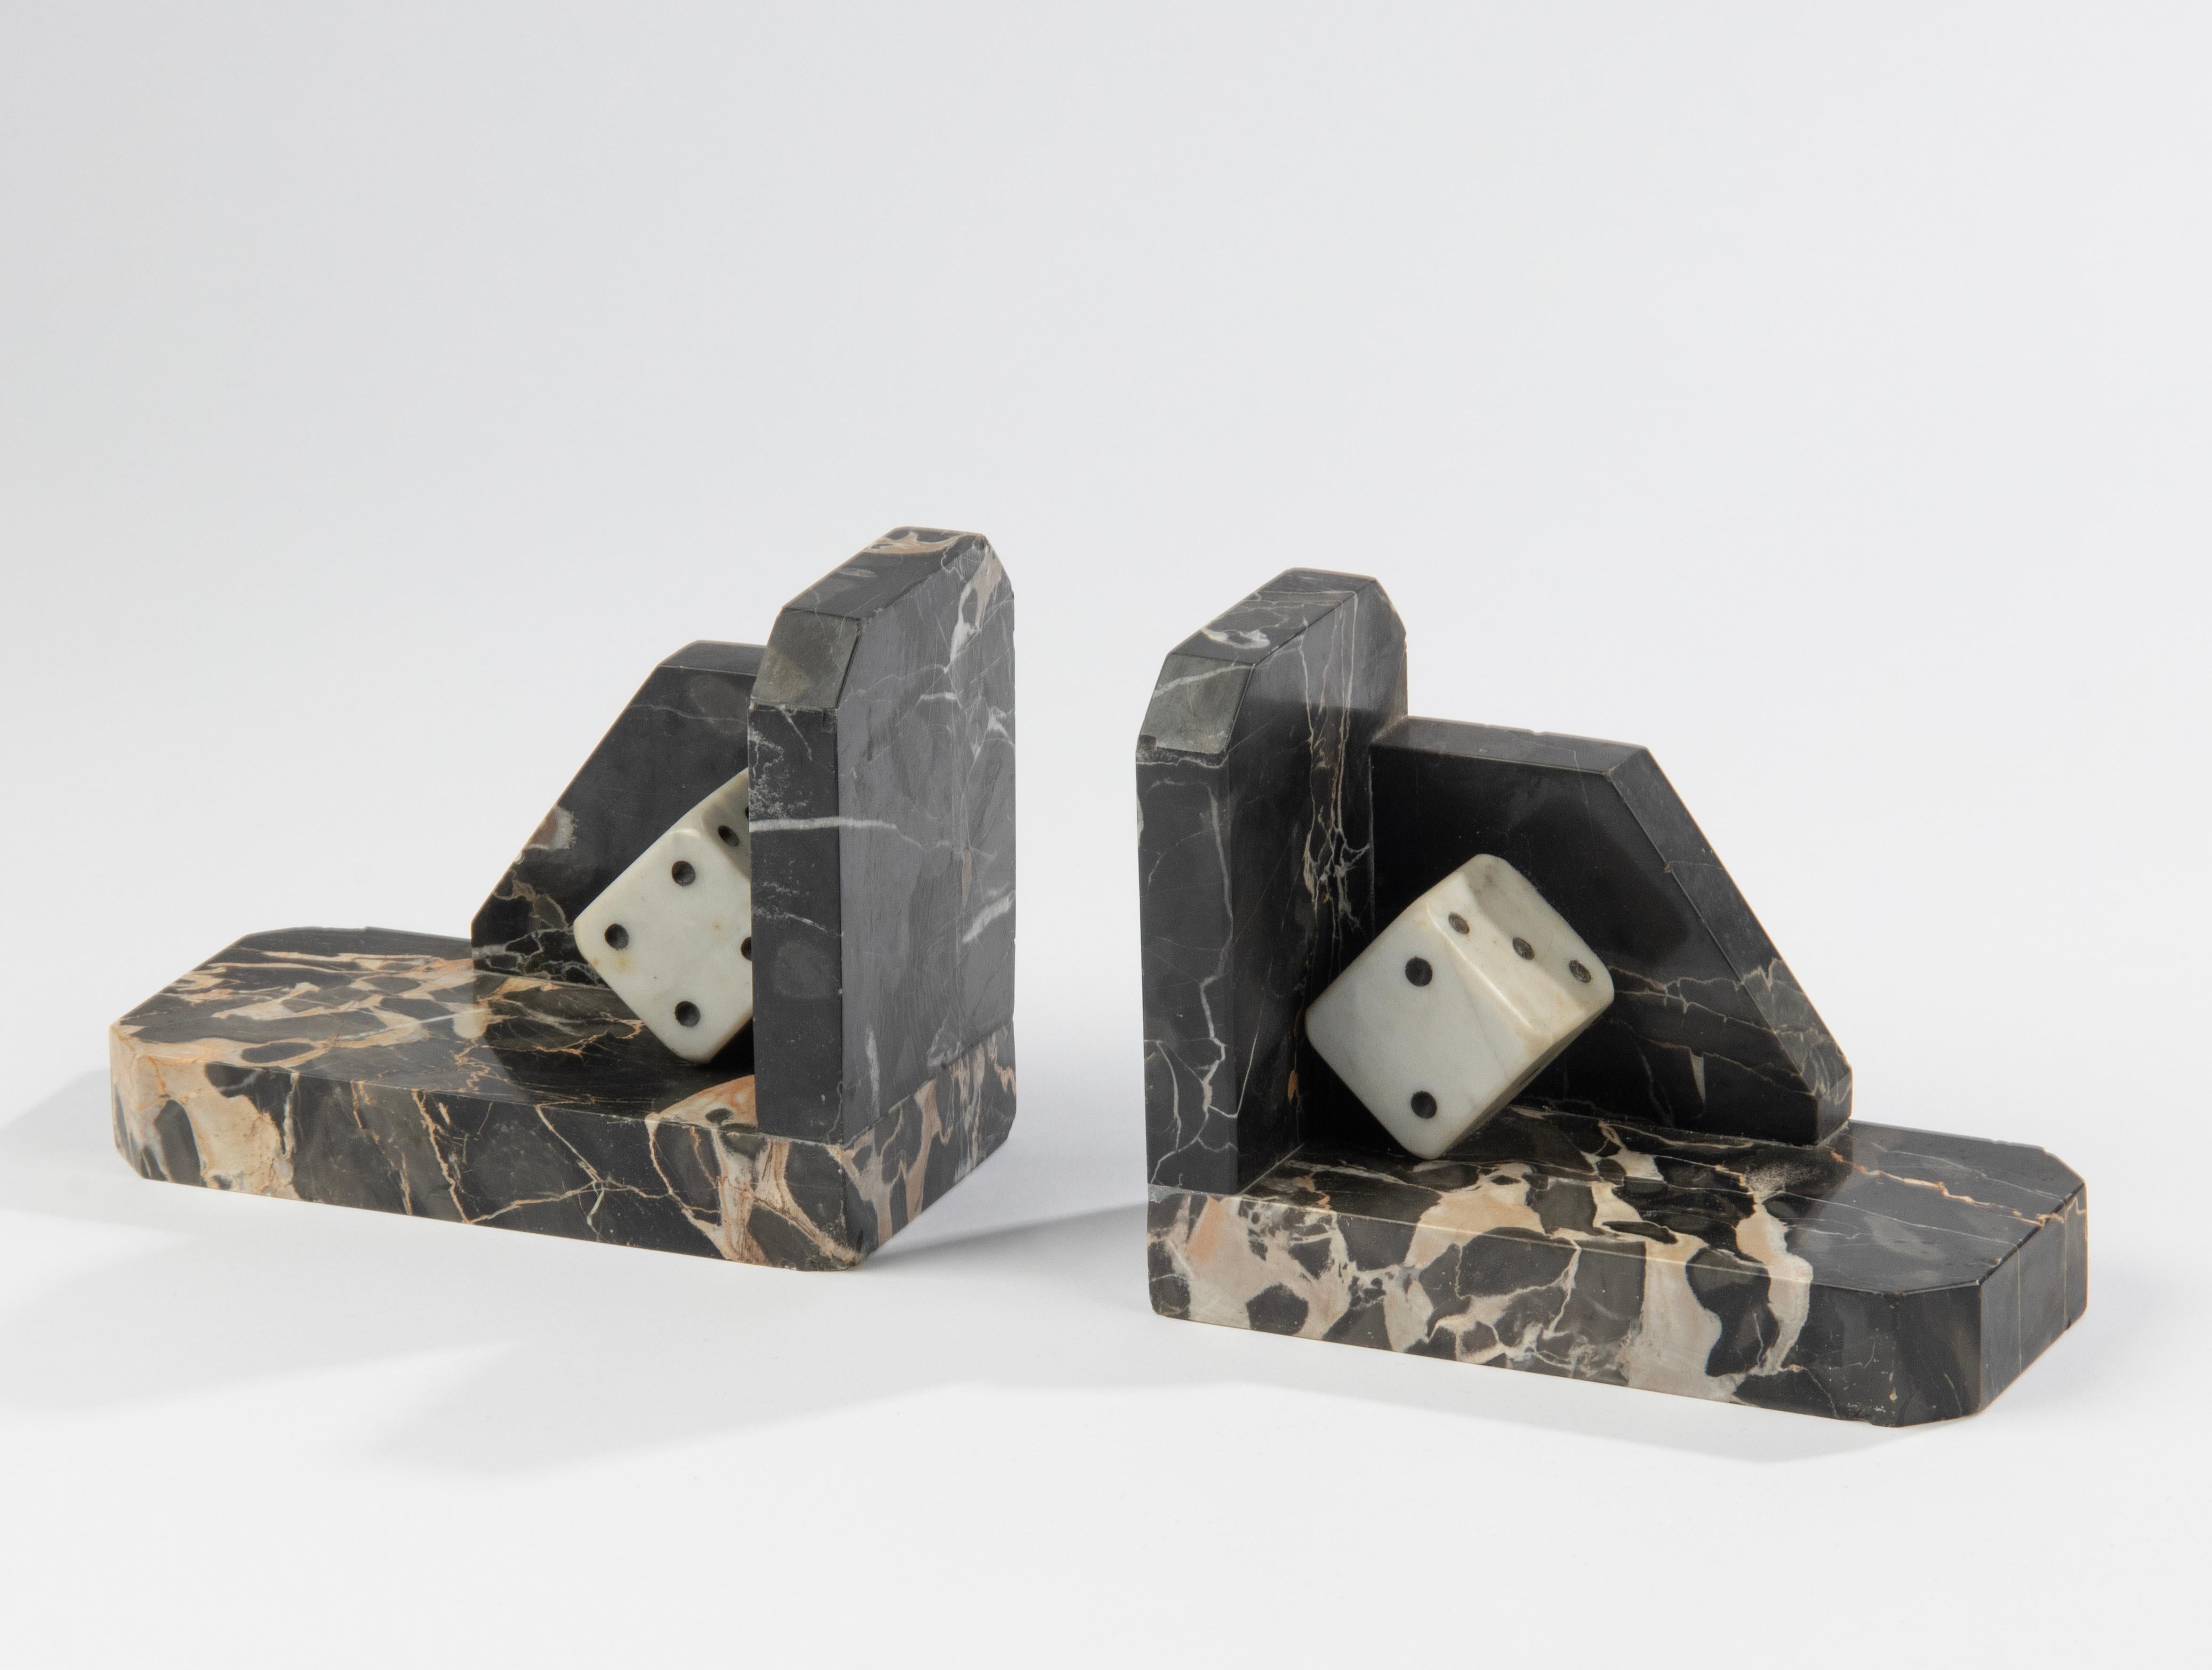 French Art Deco Period Marble Bookends with Sculpted Dice For Sale